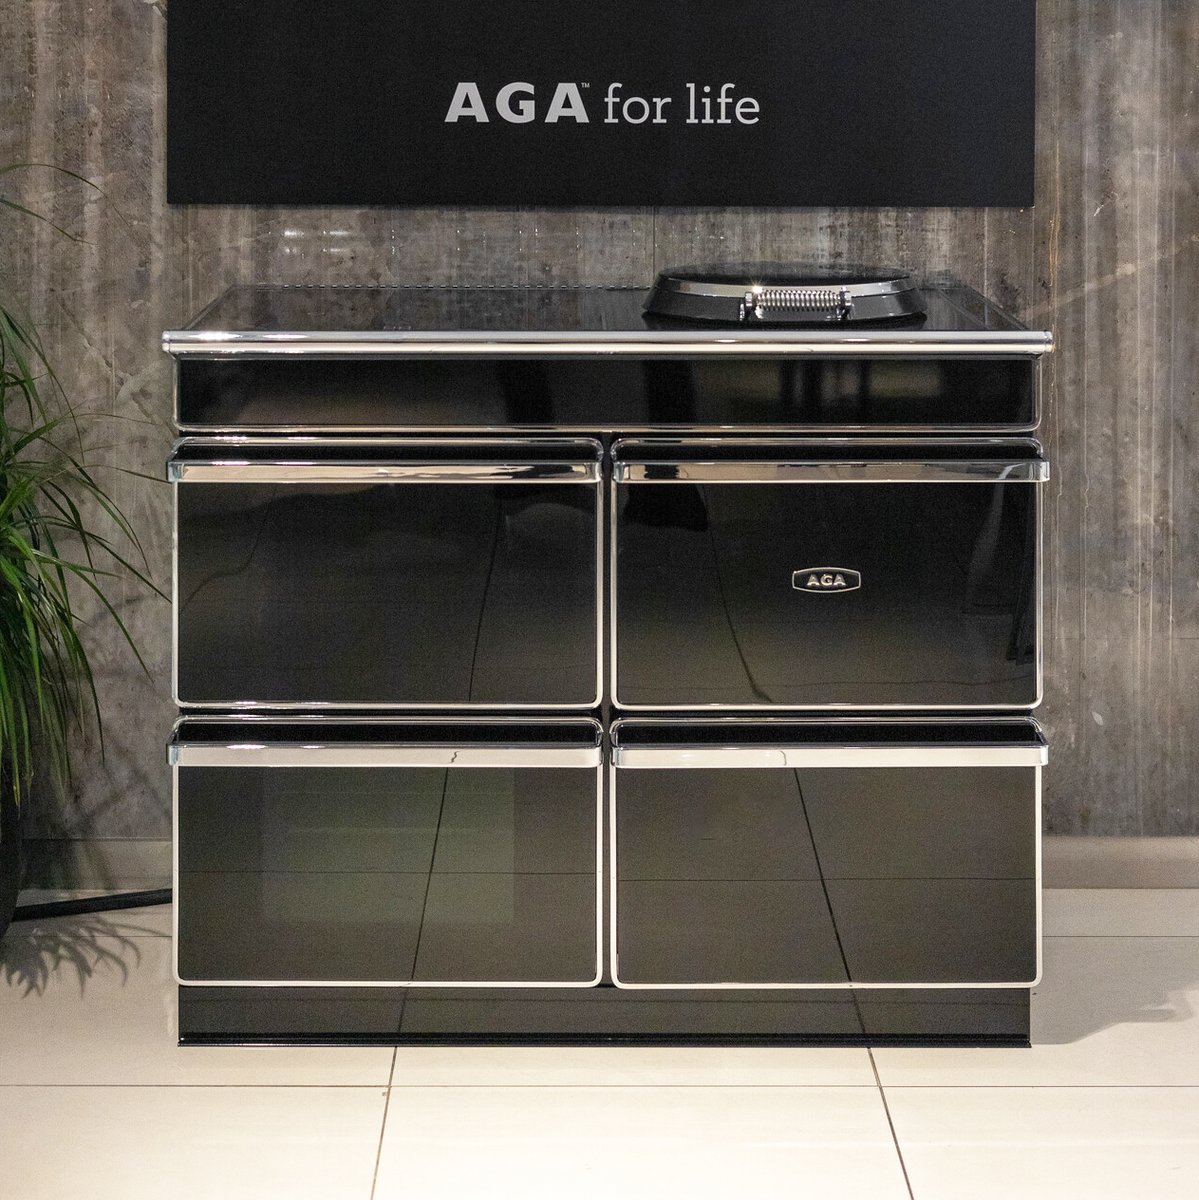 The award-winning AGA ERA has been praised by @designeratiuk as a “shining example of disruptive, mould-breaking design”. ERA from AGA is a mix of evolution and revolution, where technology meets design and where heritage meets modernity.